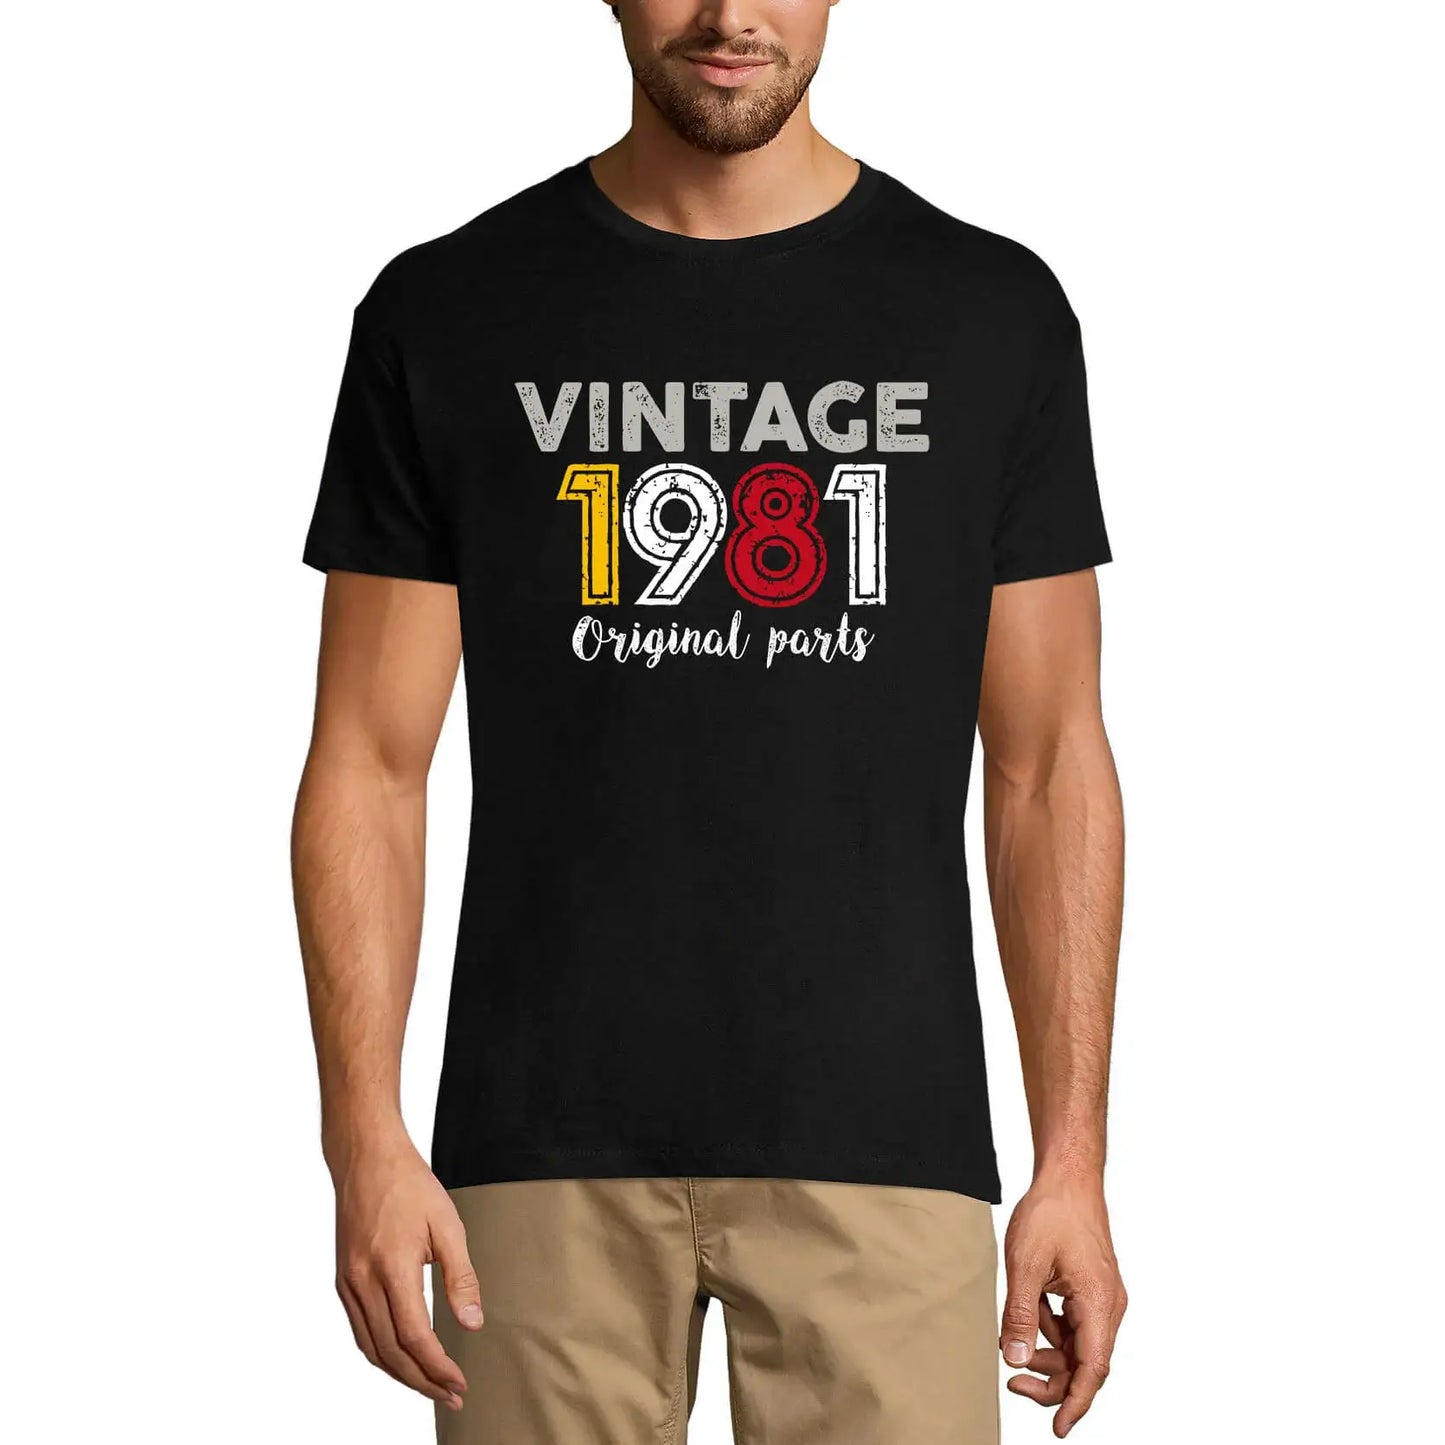 Men's Graphic T-Shirt Original Parts 1981 43rd Birthday Anniversary 43 Year Old Gift 1981 Vintage Eco-Friendly Short Sleeve Novelty Tee